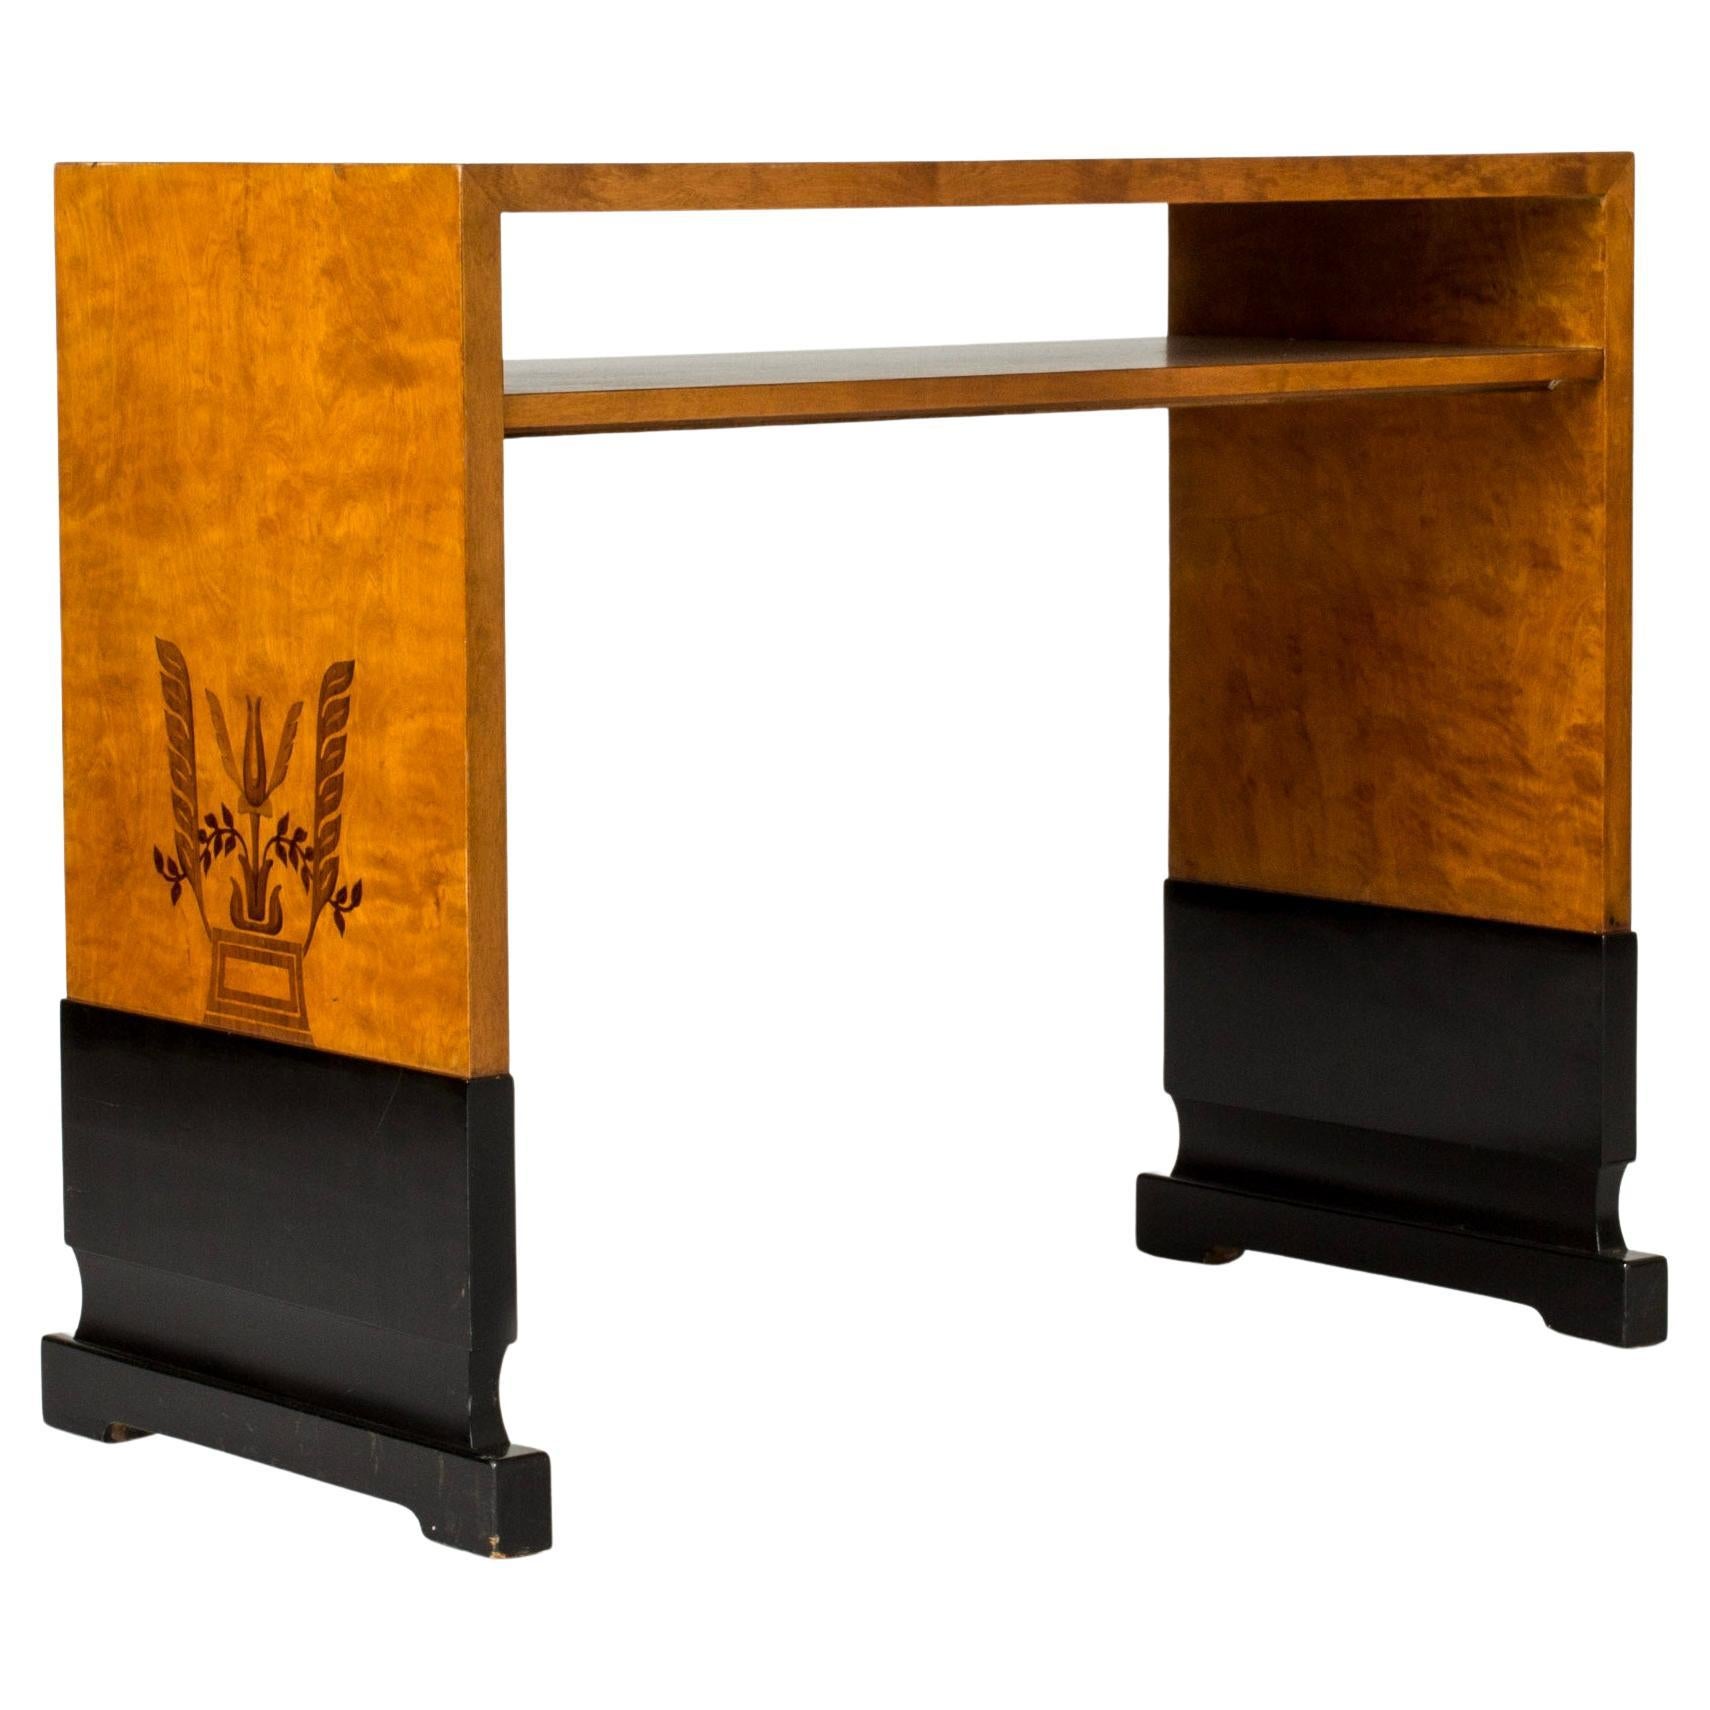 Swedish Modern Console Table, Sweden, 1920s For Sale